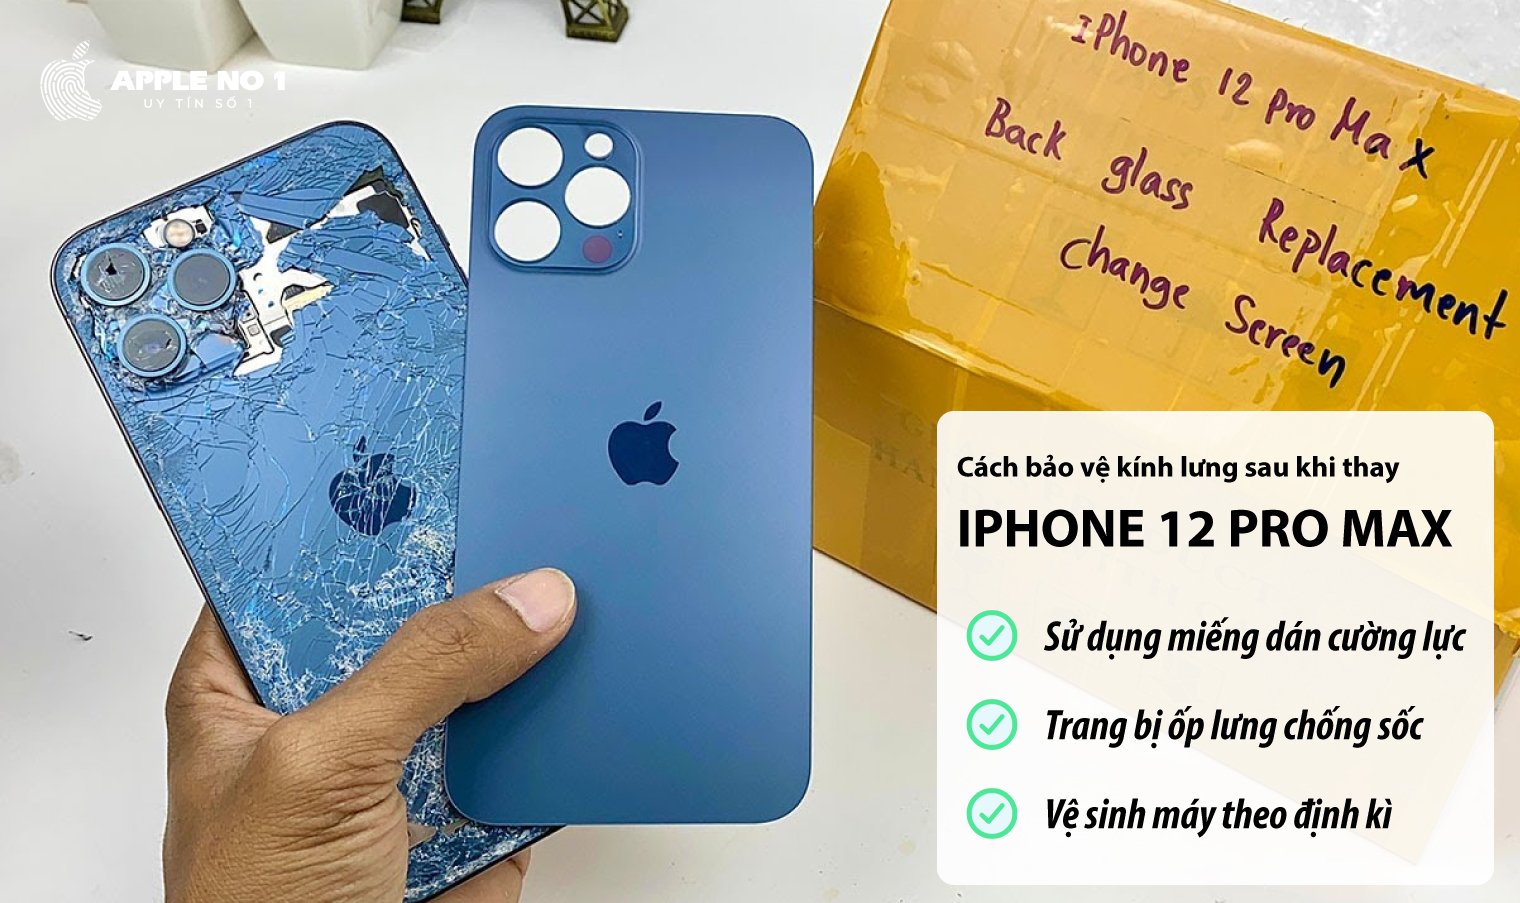 cach bao ve kinh lung iphone 12 pro max sau khi thay